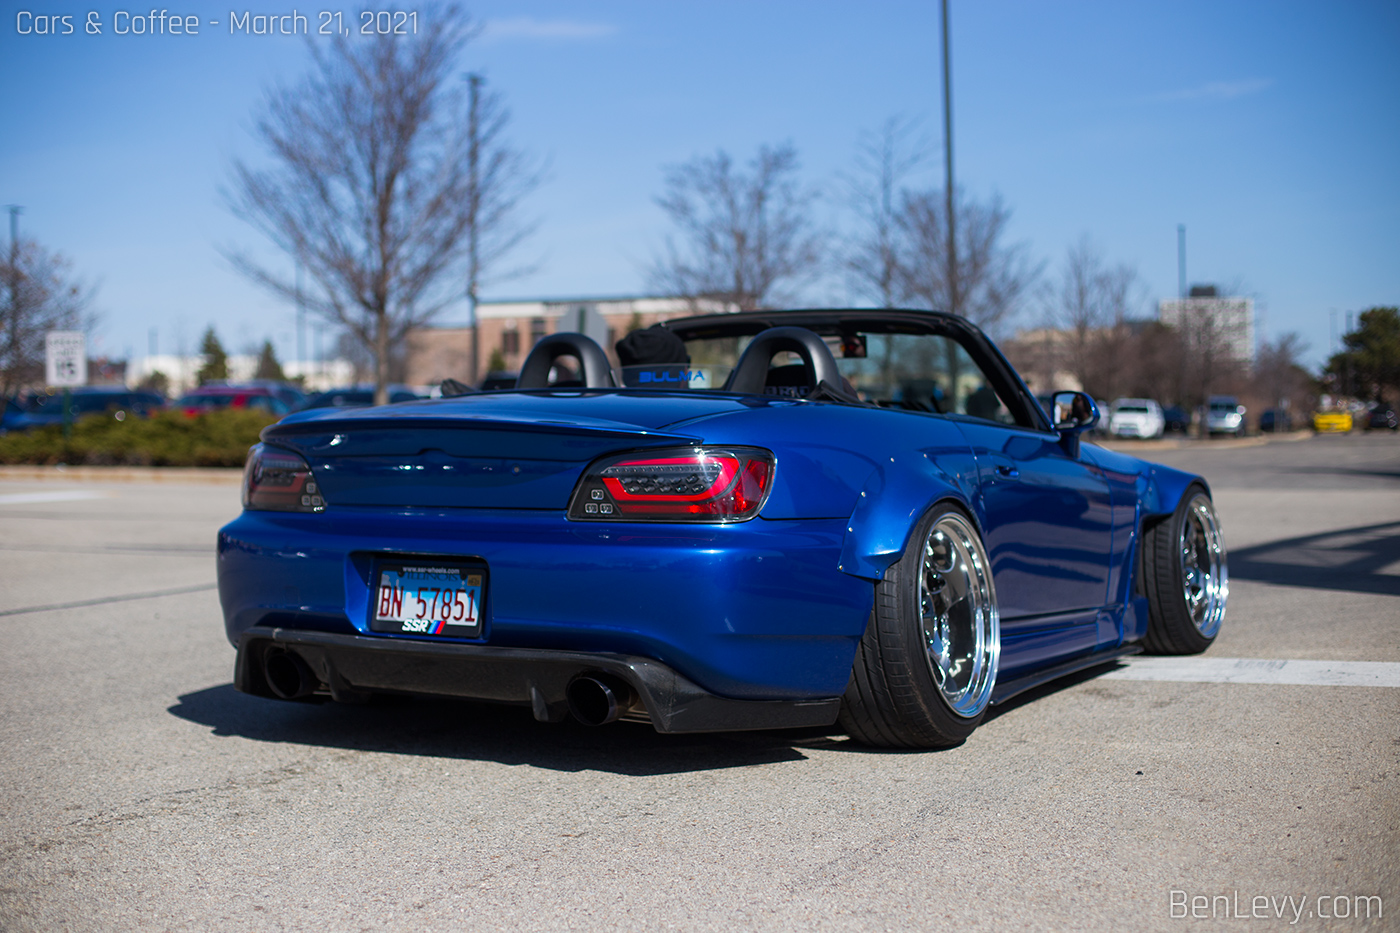 Blue Honda S2000 at the Streets of Woodfield